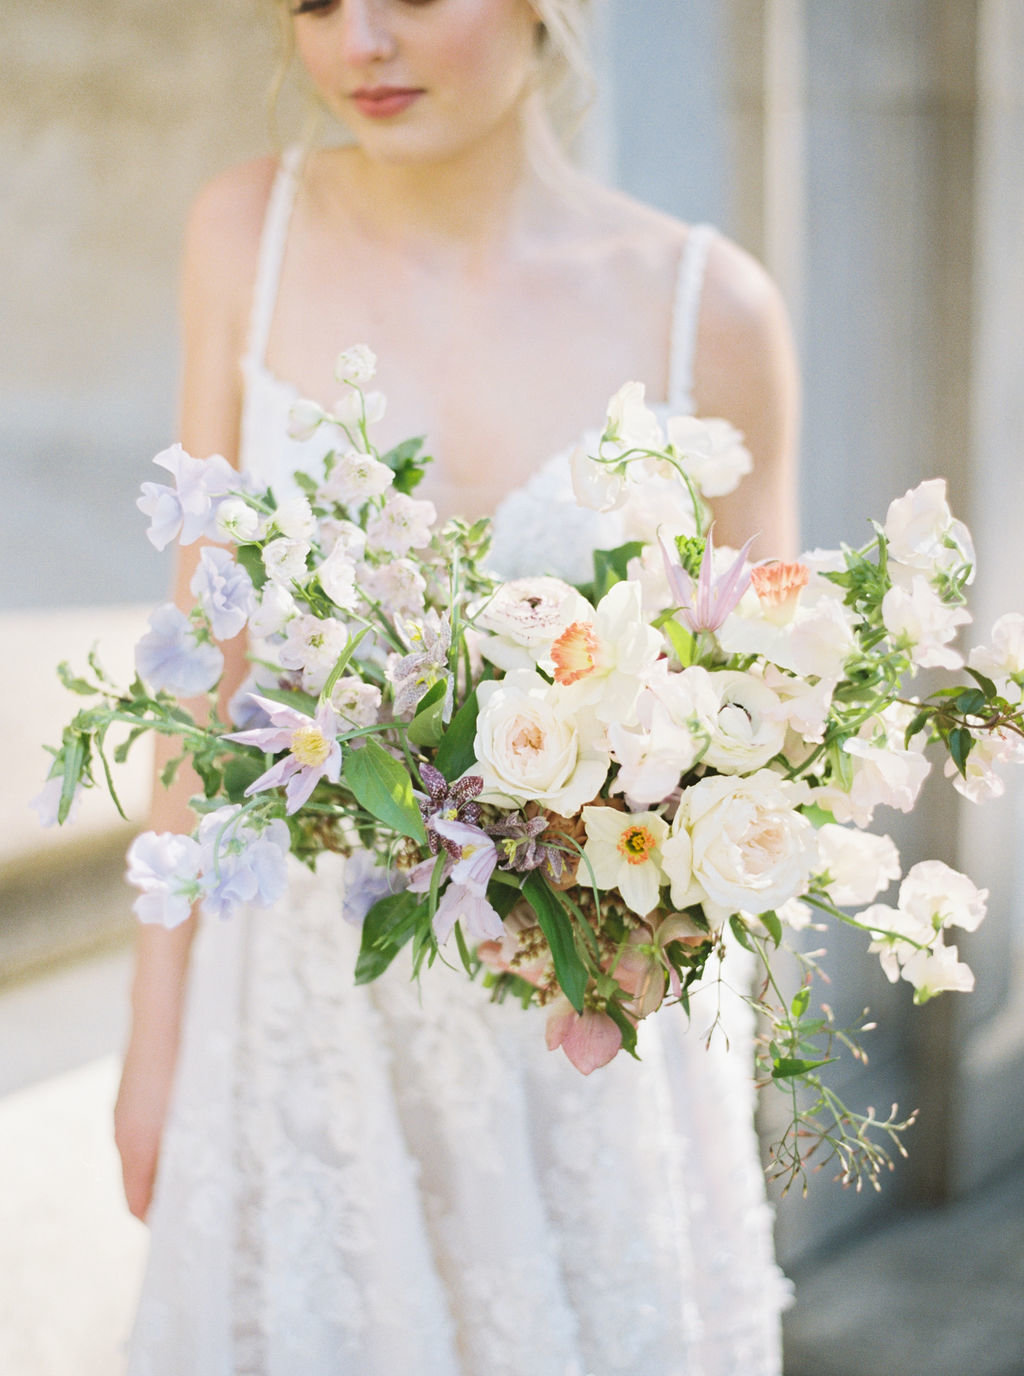 Swan House wedding bouquet of pastel spring flowers designed by Gradient and Hue